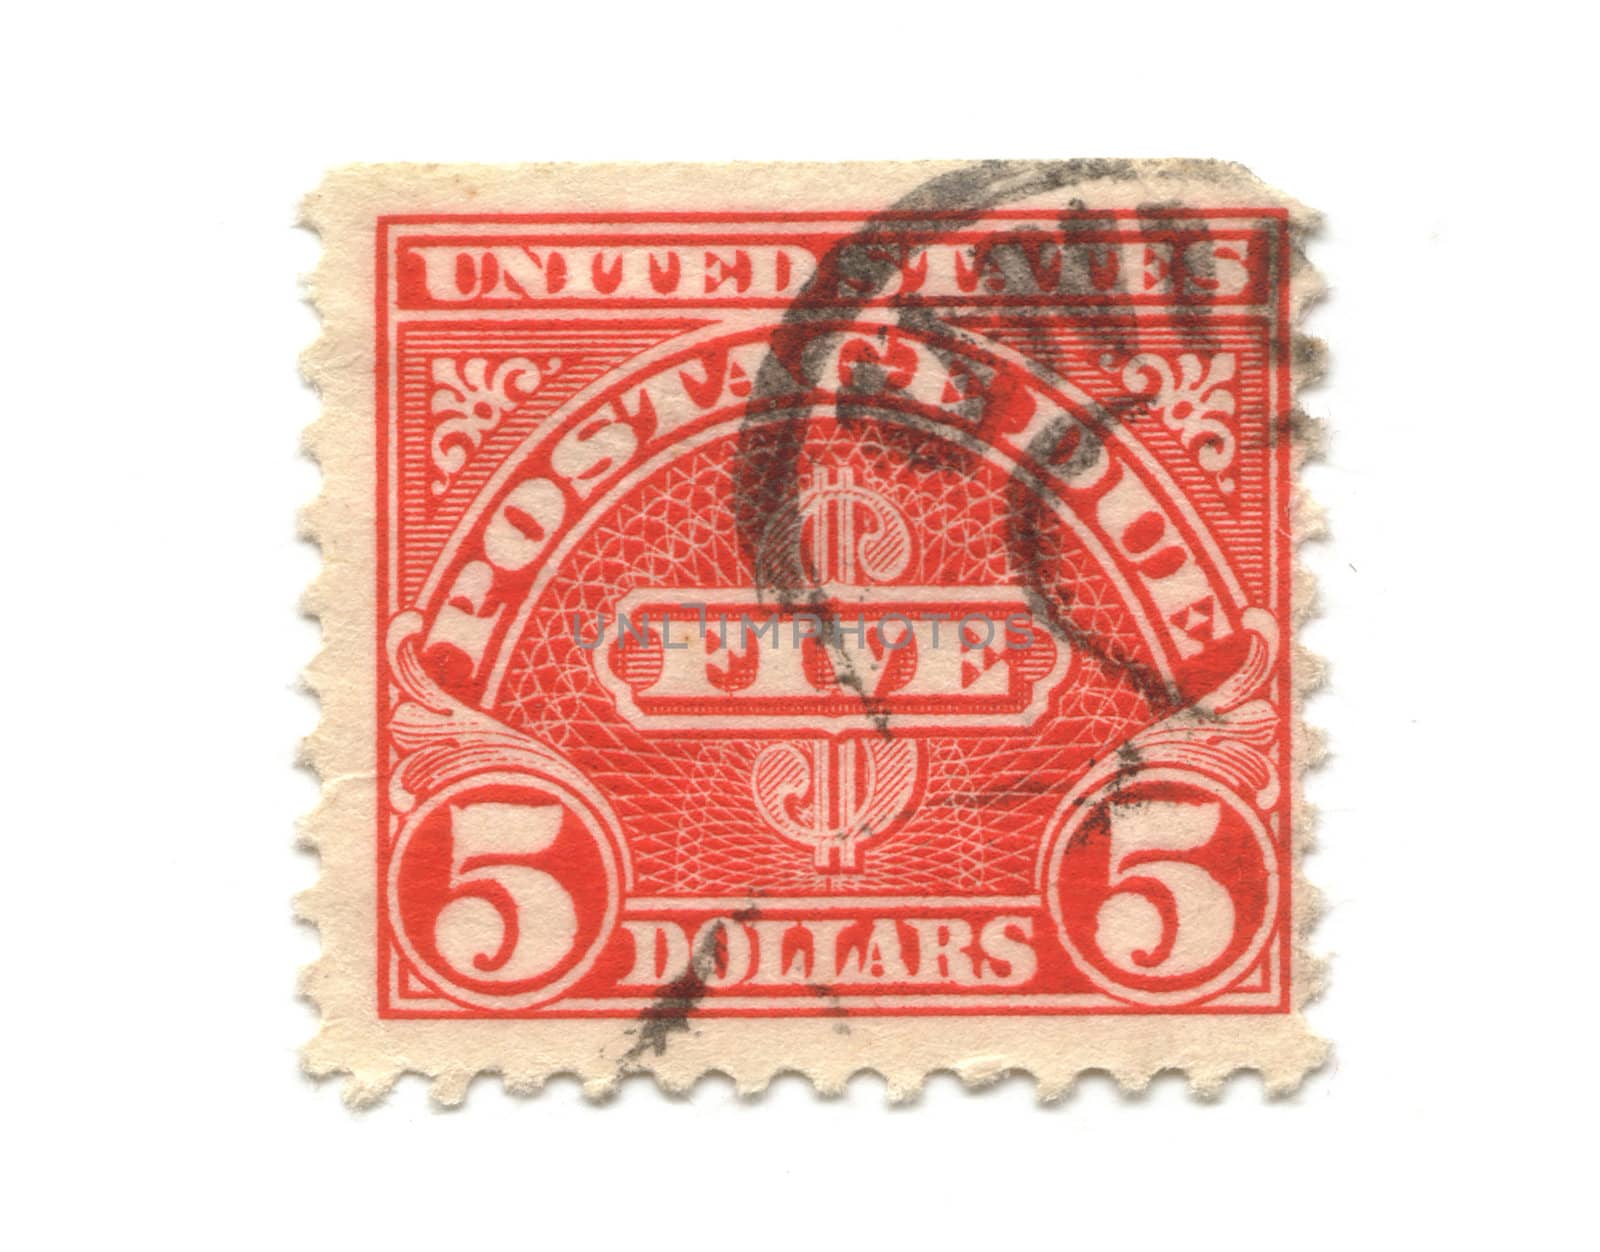 Old postage stamps from USA - 5 Dollars 